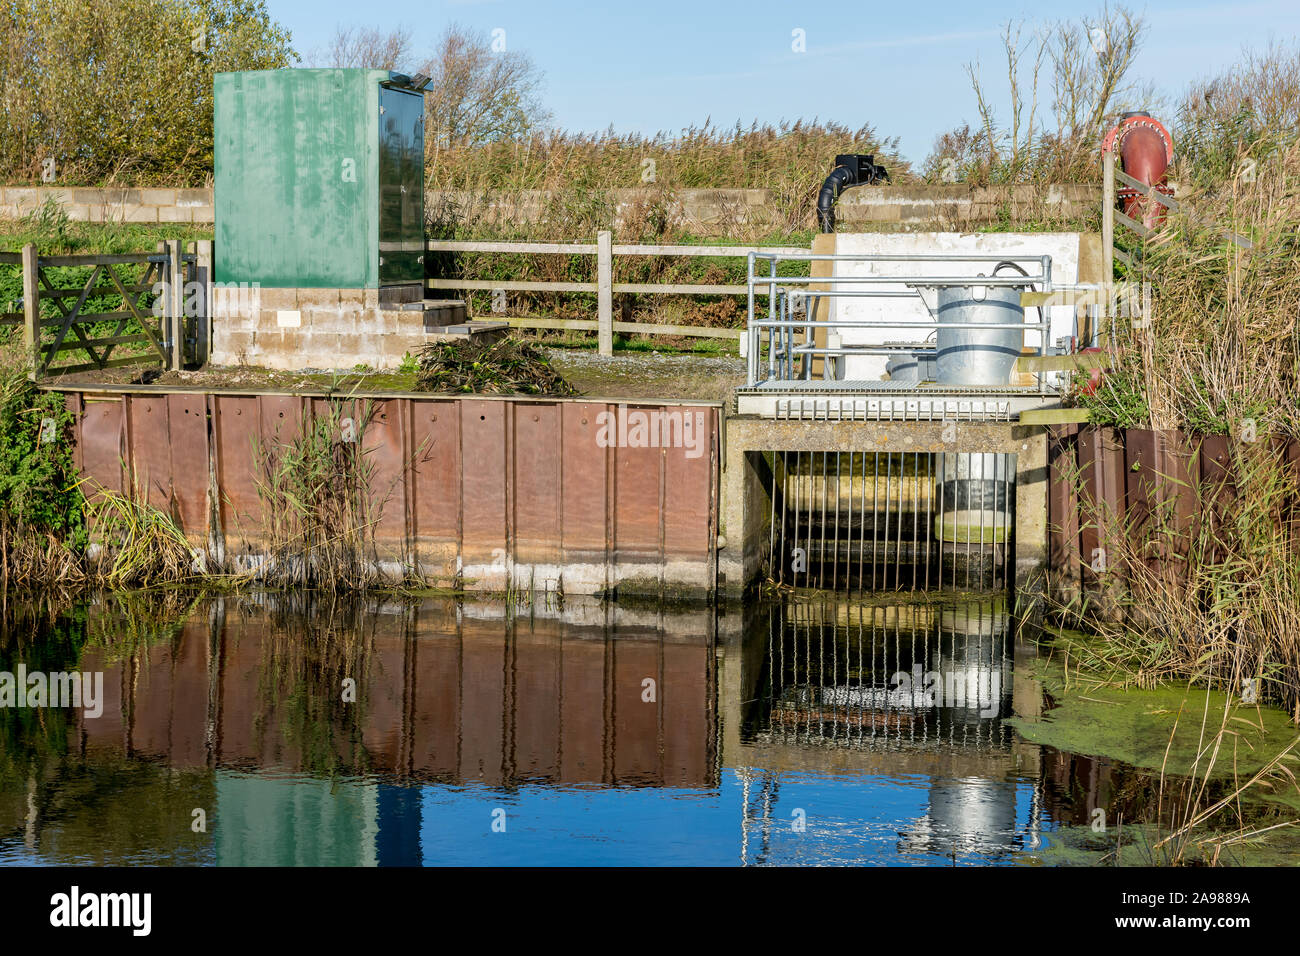 Lowland pumping station used to transfer water between the River Waveney and Carlton Marsh wetland reserve and as a flood prevention scheme Stock Photo